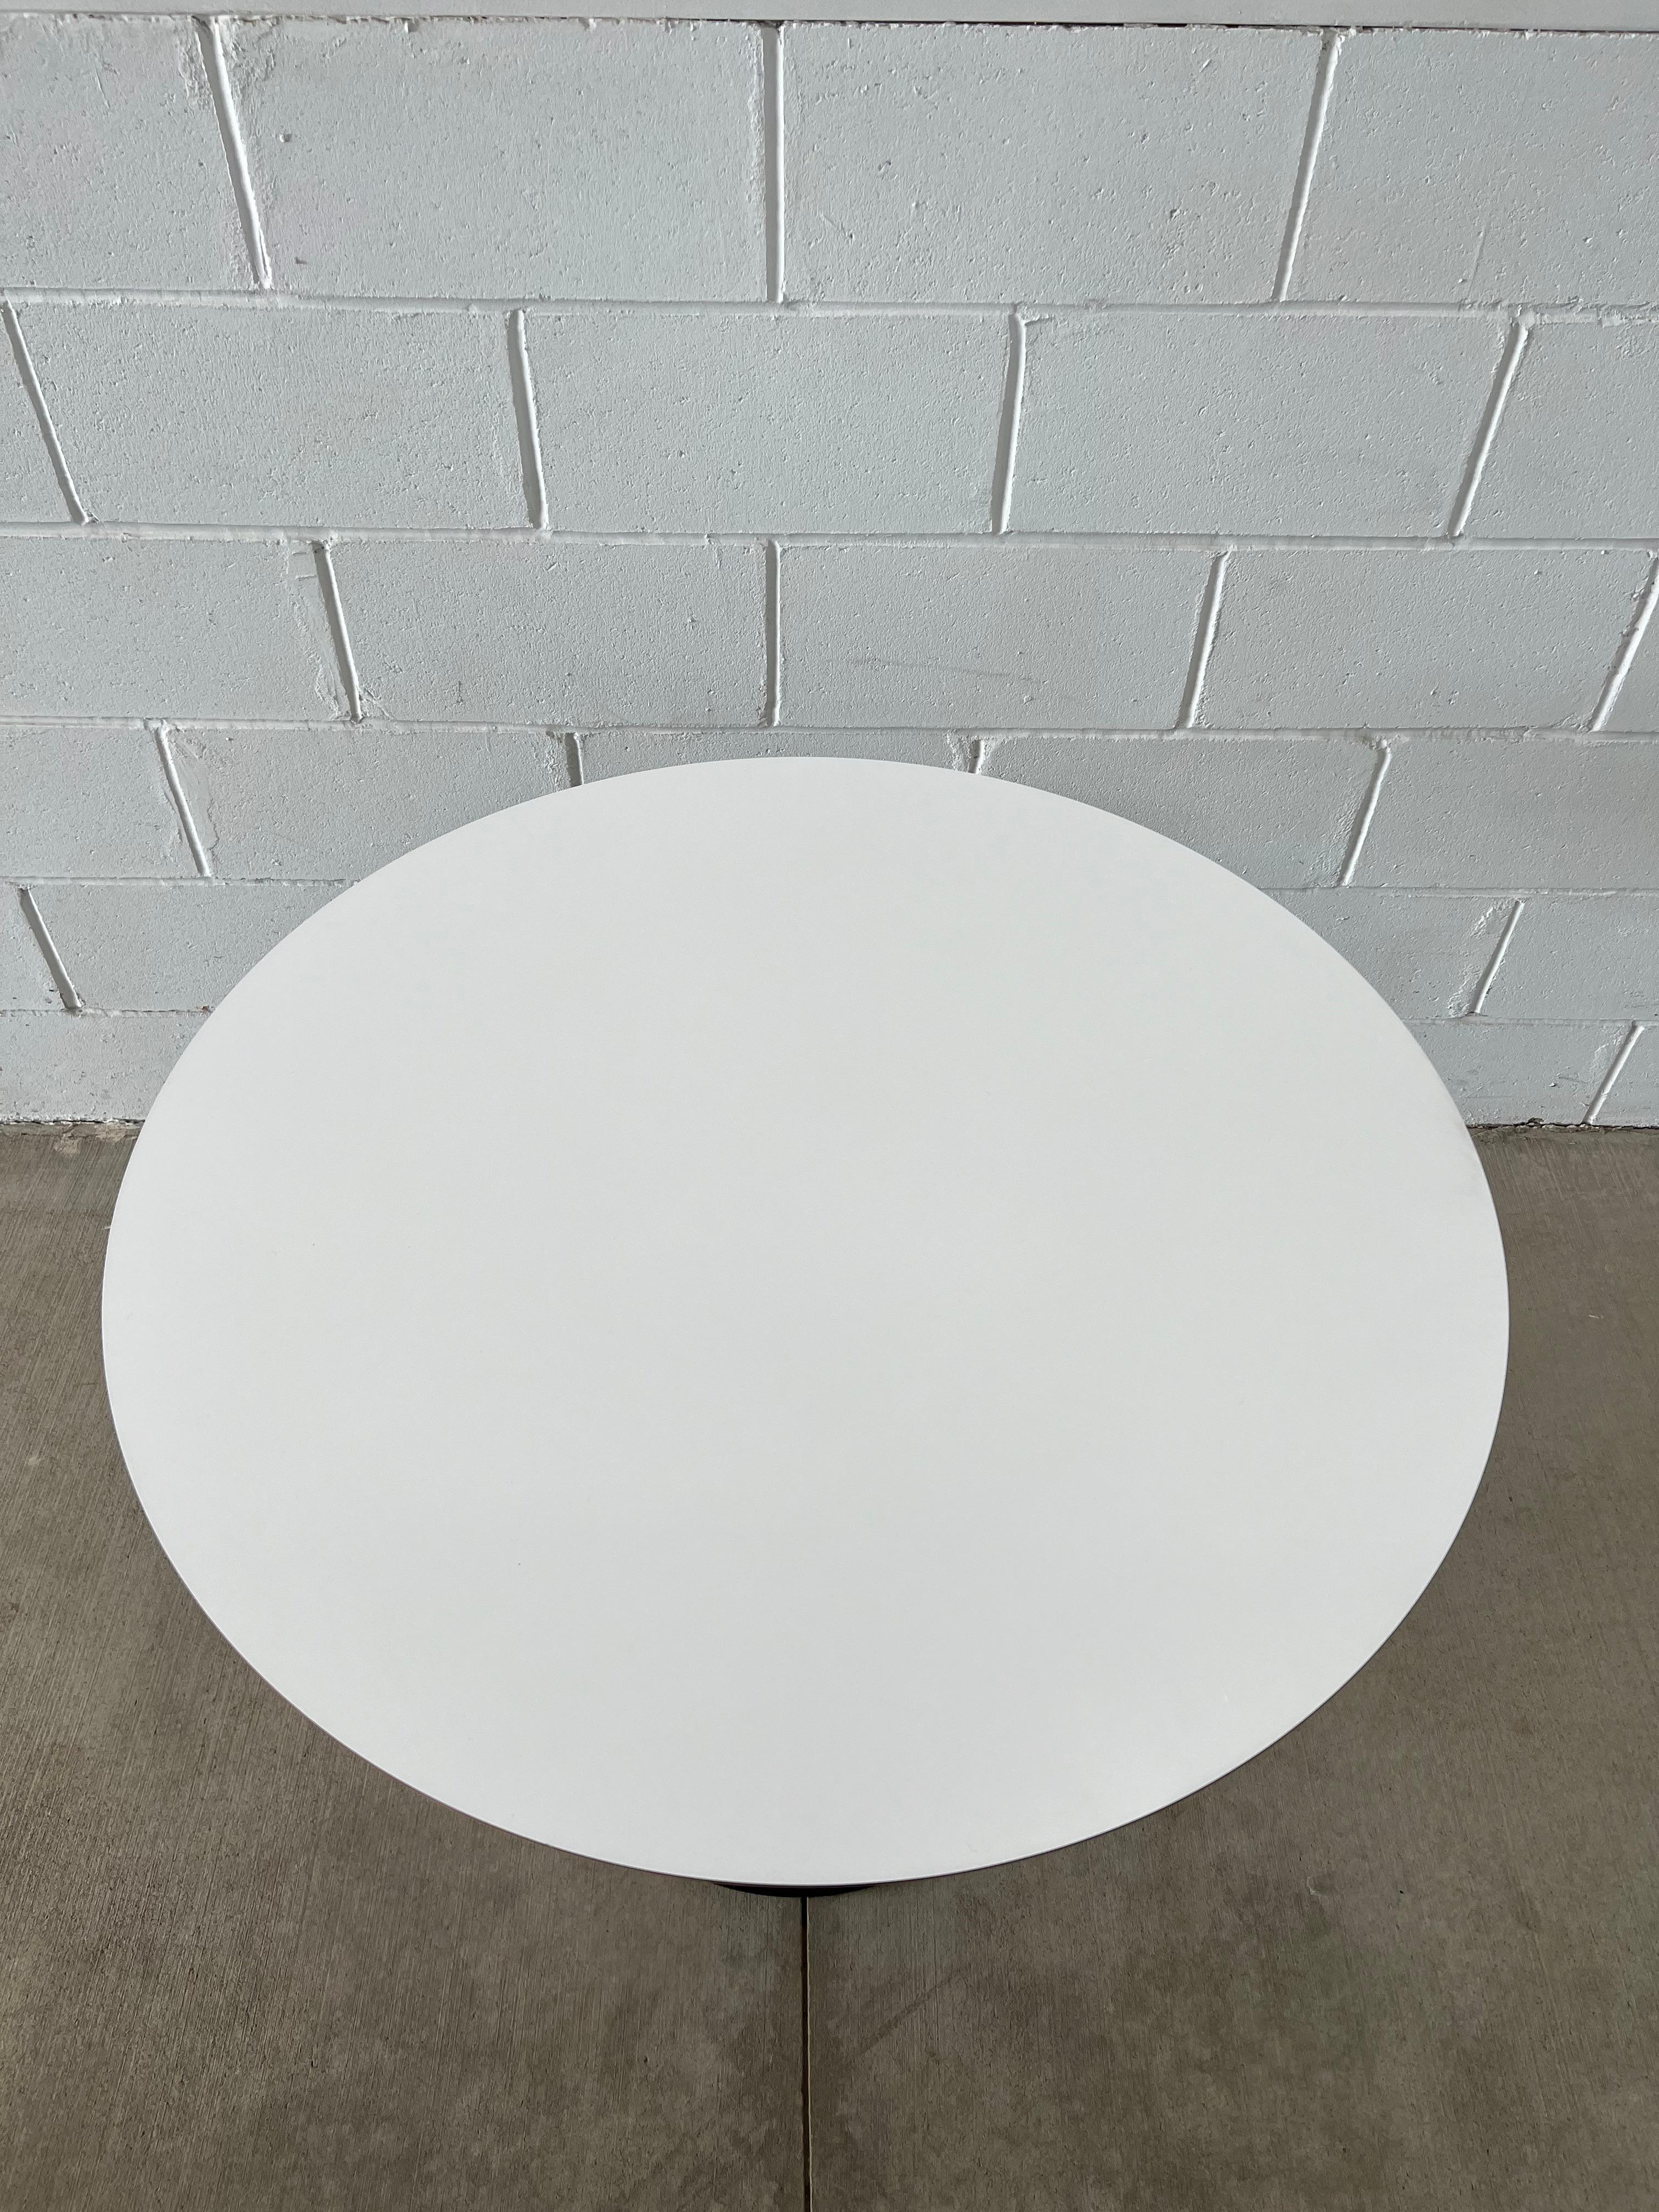 North American Cyclone Table by Isamu Noguchi for Knoll